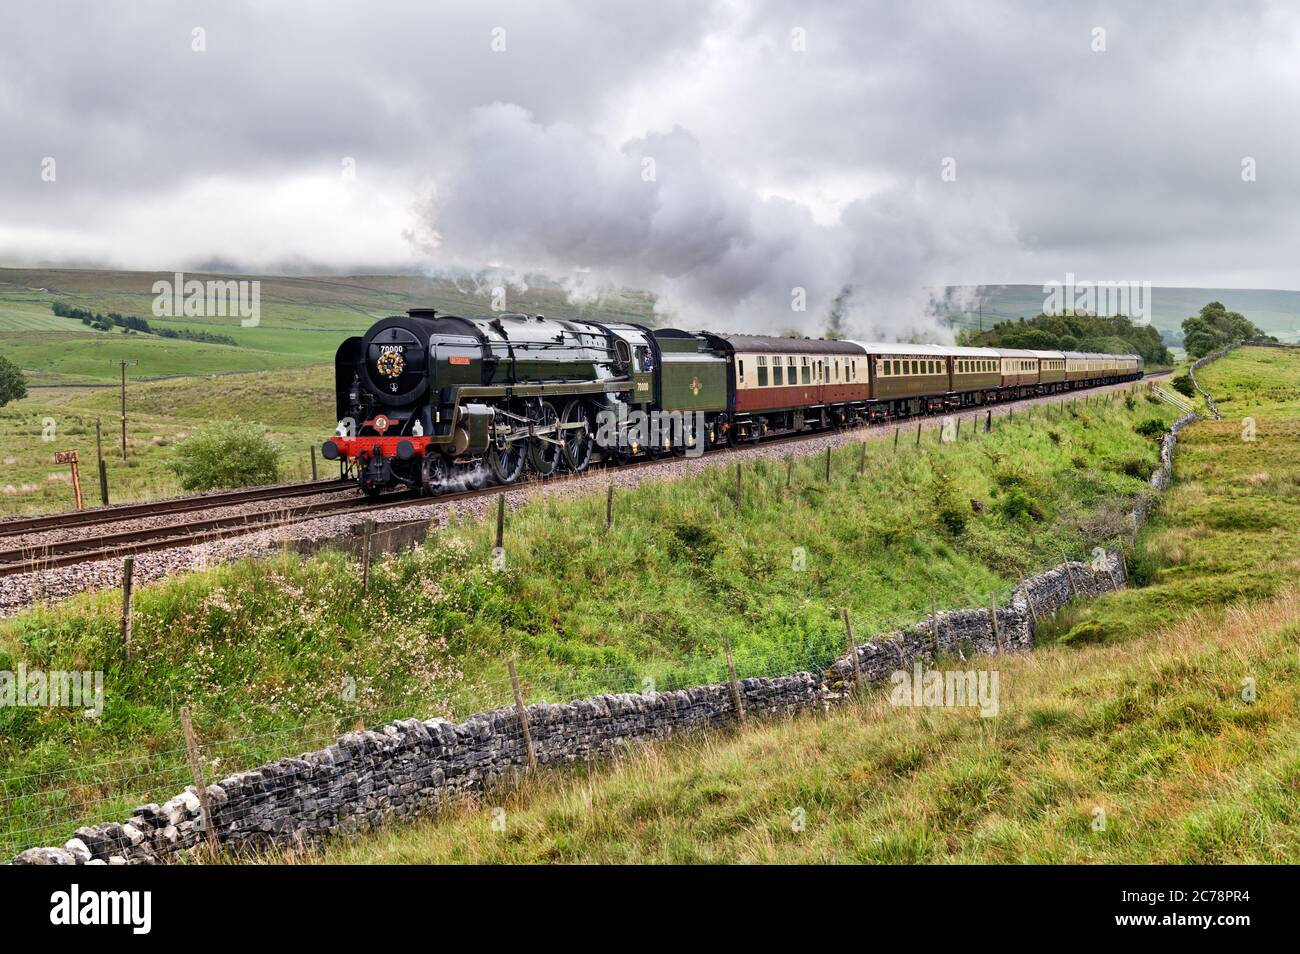 Ribblesdale, North Yorkshire, UK. 15th July 2020. Steam returns to the famous Settle-Carlisle railway line for the first time since Covid-19 lockdown began in March. Under stormy skies, iconic vintage steam locomotive 'Britannia' is seen here hauling 'The Fellsman' special train north from Settle towards Carlisle, on a trip that began at Crewe. Pictured here at Selside, Ribblesdale, in The Yorkshire Dales National Park. The service is operated by Saphos Trains. Credit: John Bentley/Alamy Live News Stock Photo